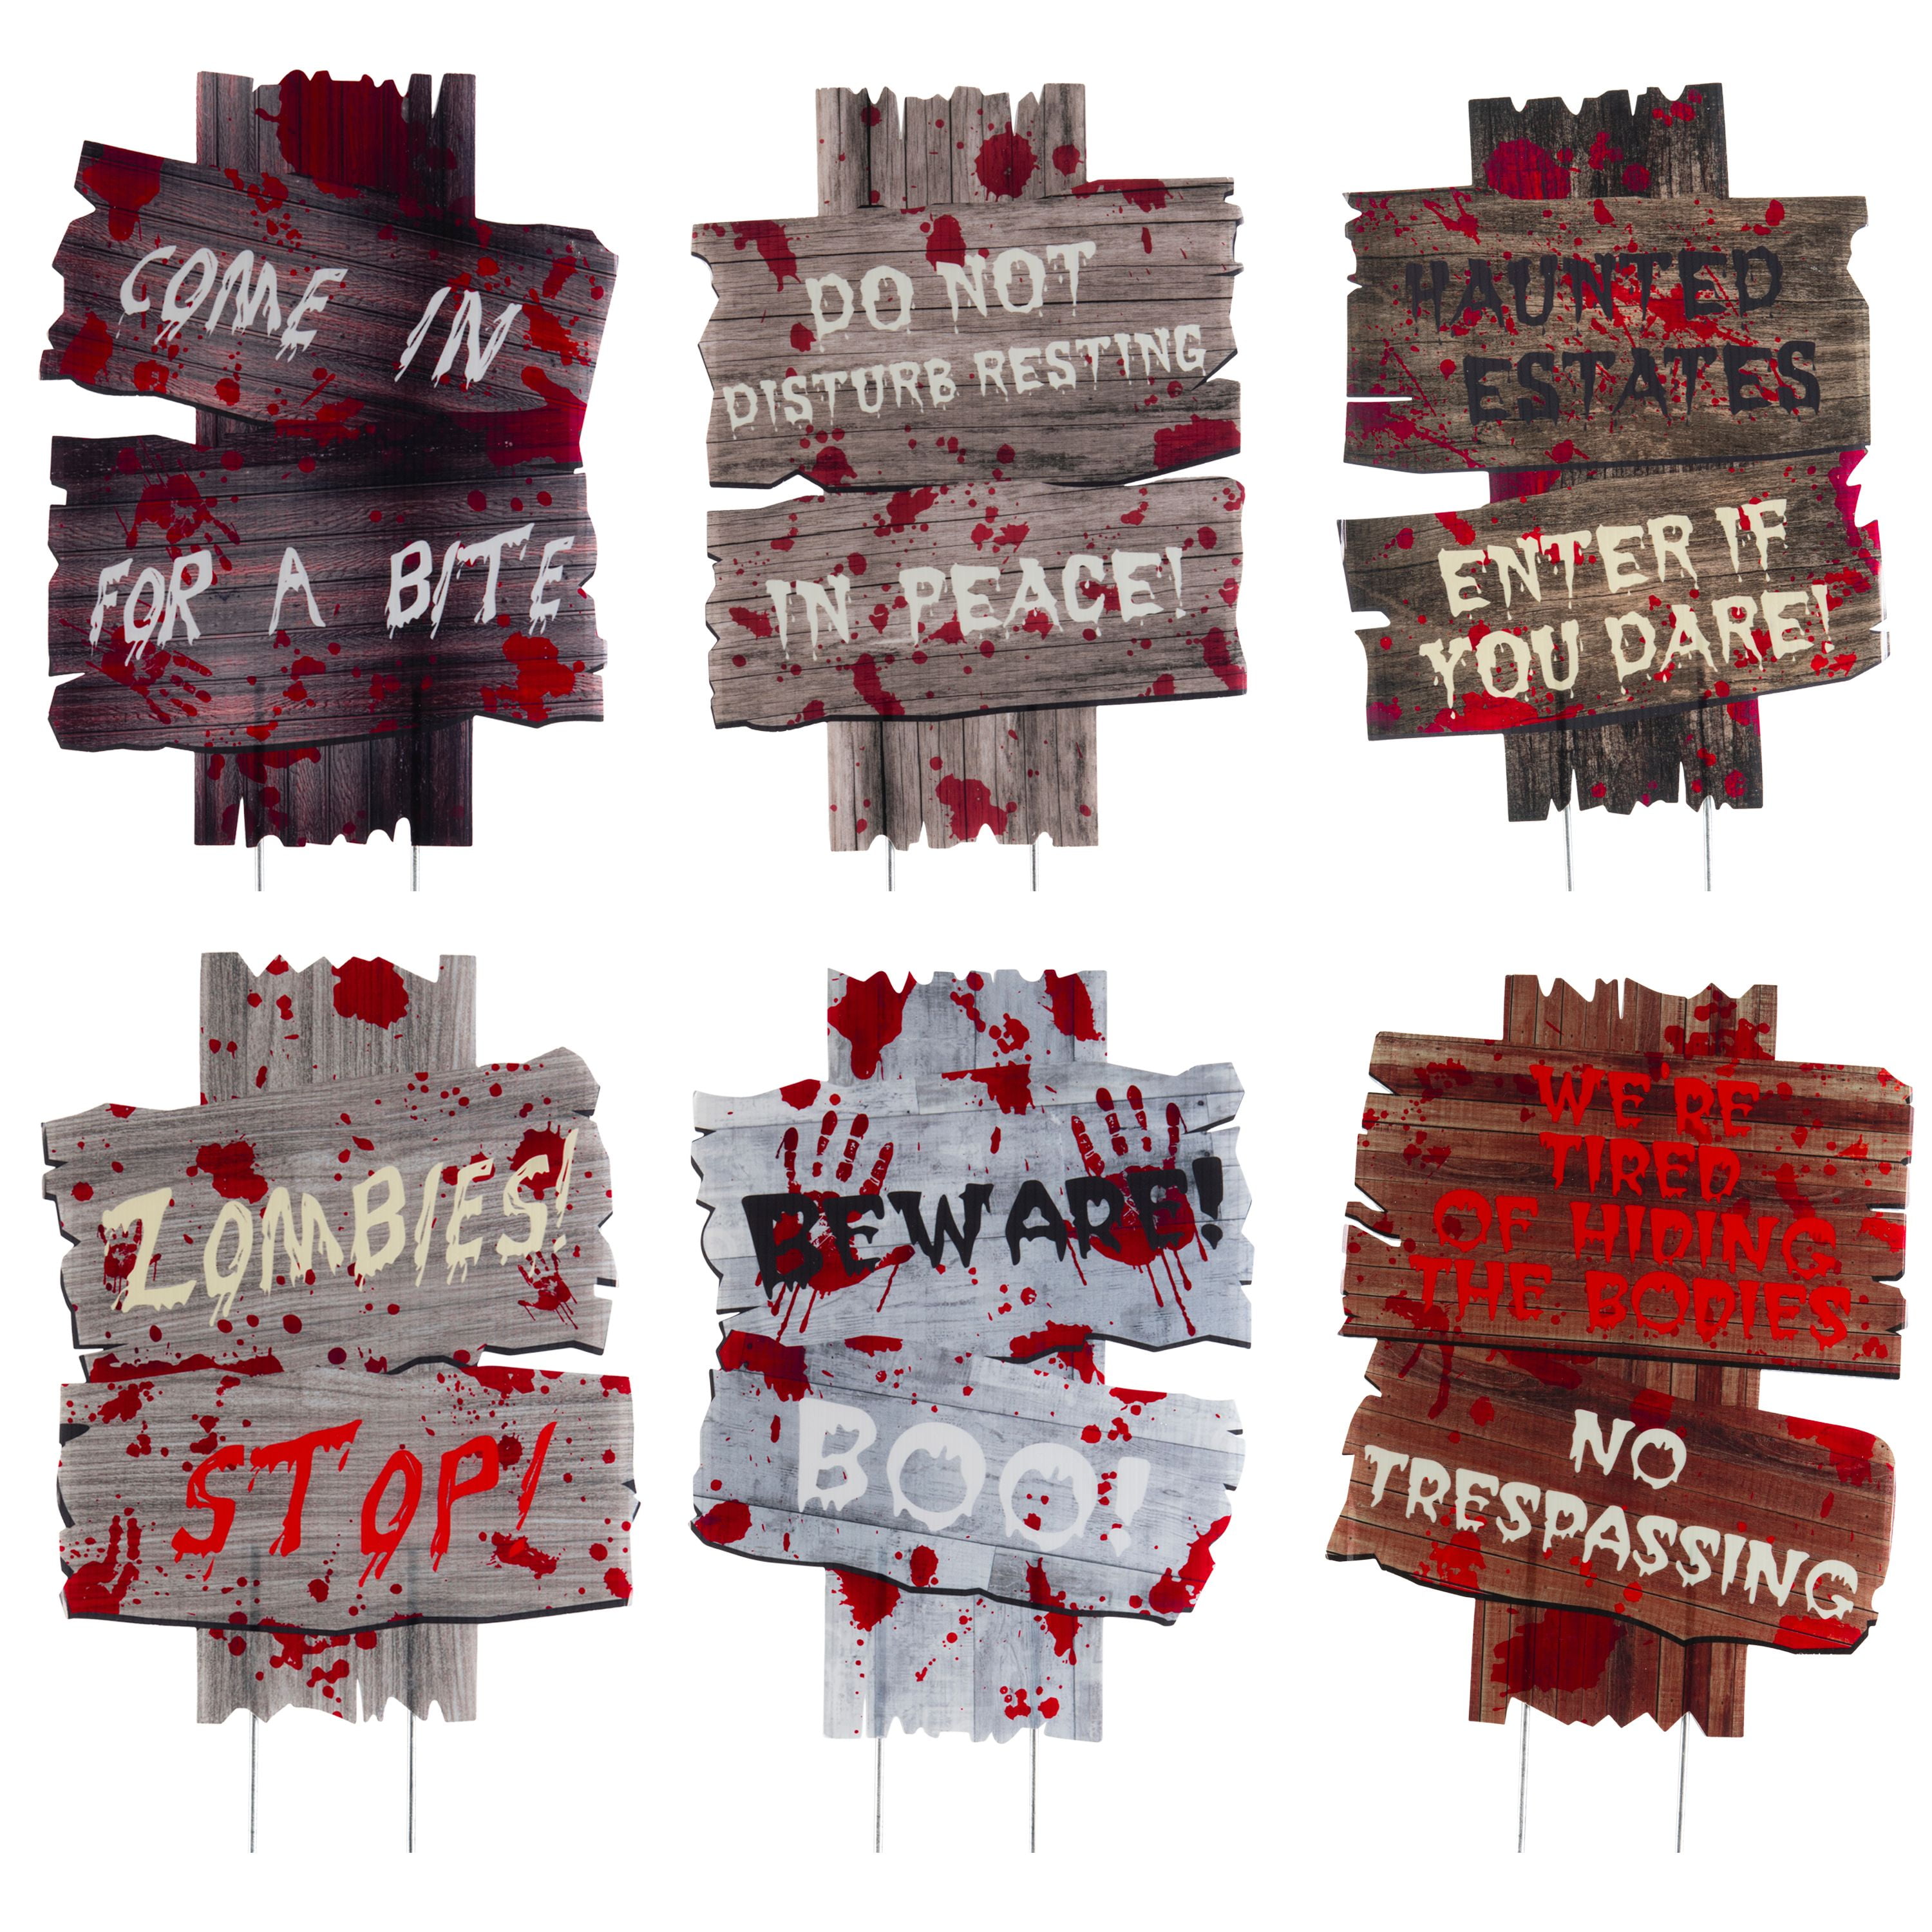 Prextex Halloween Decorations- Yard Signs for Scary Outdoor Decoration - Beware - No Trespassing - Zombies Stop! Creepy Sidewalk Warning Signs with Metal Stakes (6 Piece Set, 12 x 9 - Walmart.com